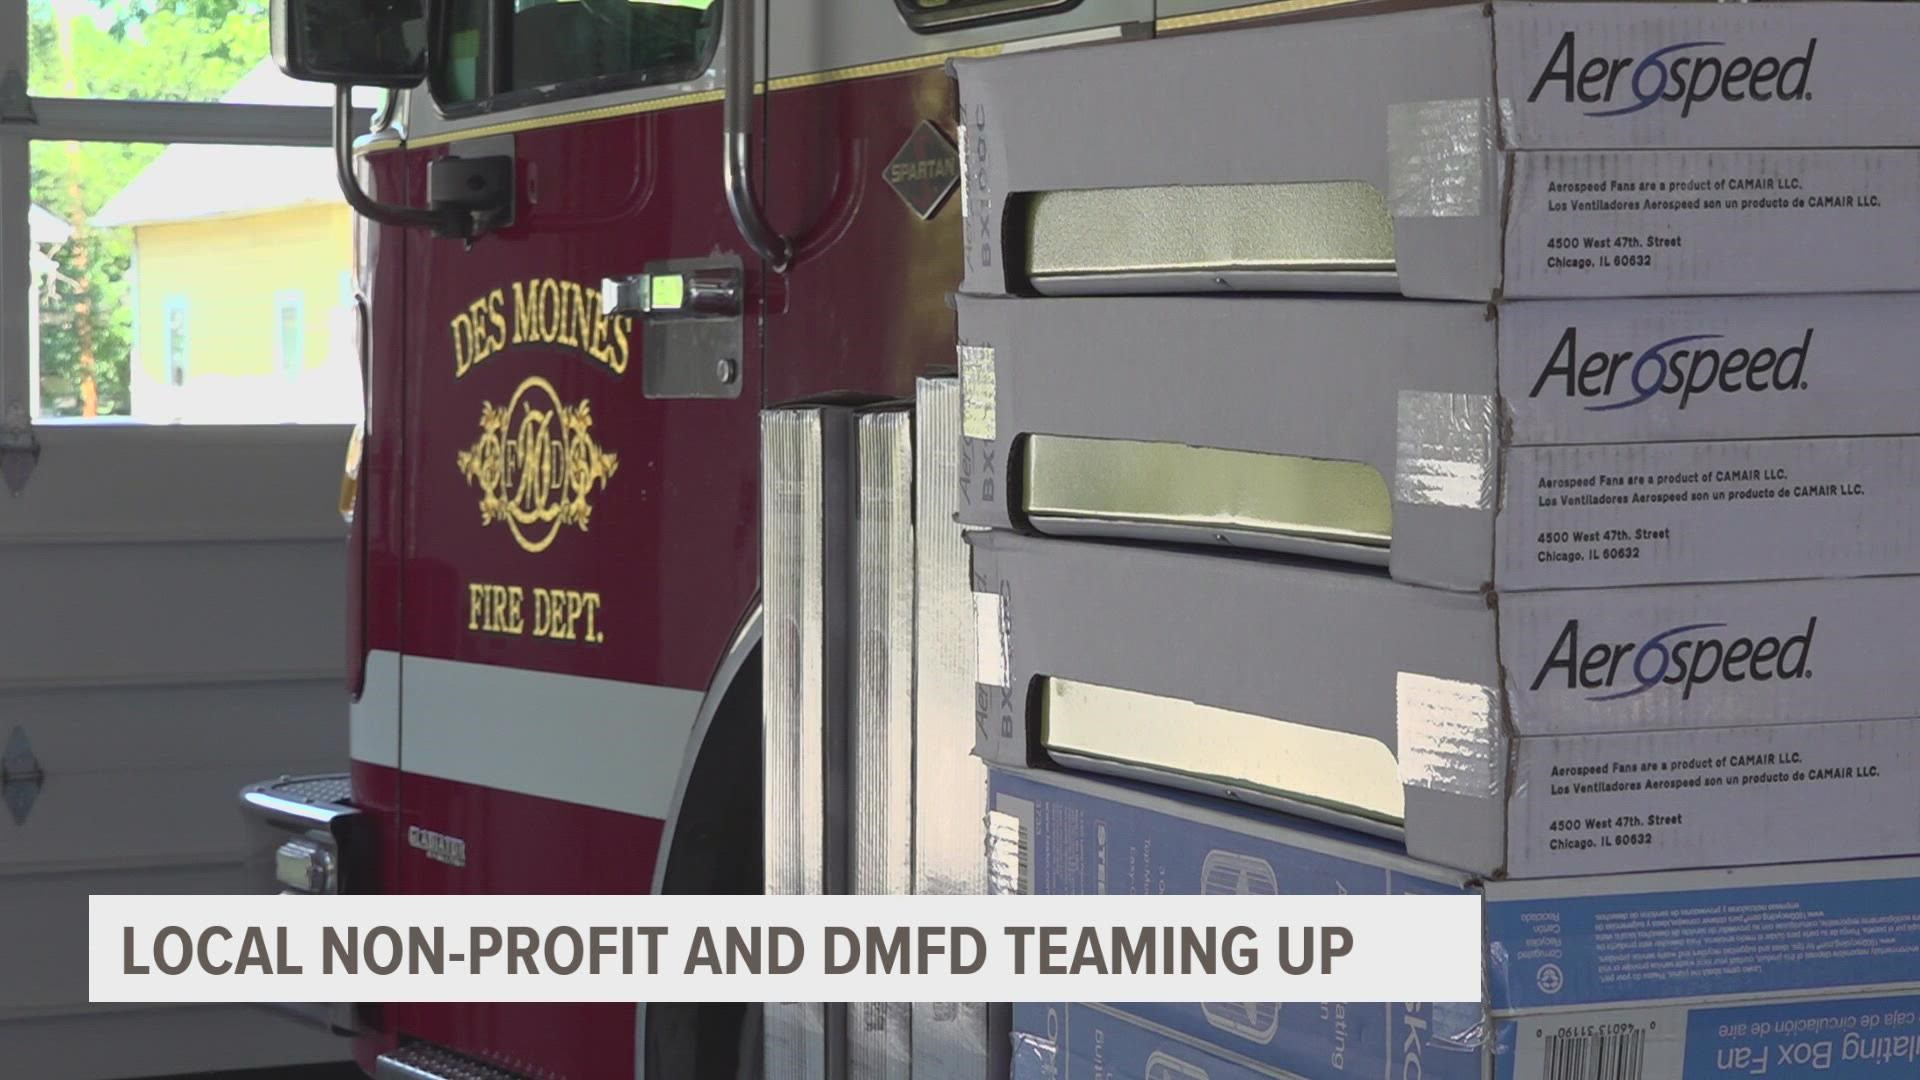 The Des Moines Fire Department and IMPACT Community Action Partnership are asking residents to donate unused fans and air conditioning units.